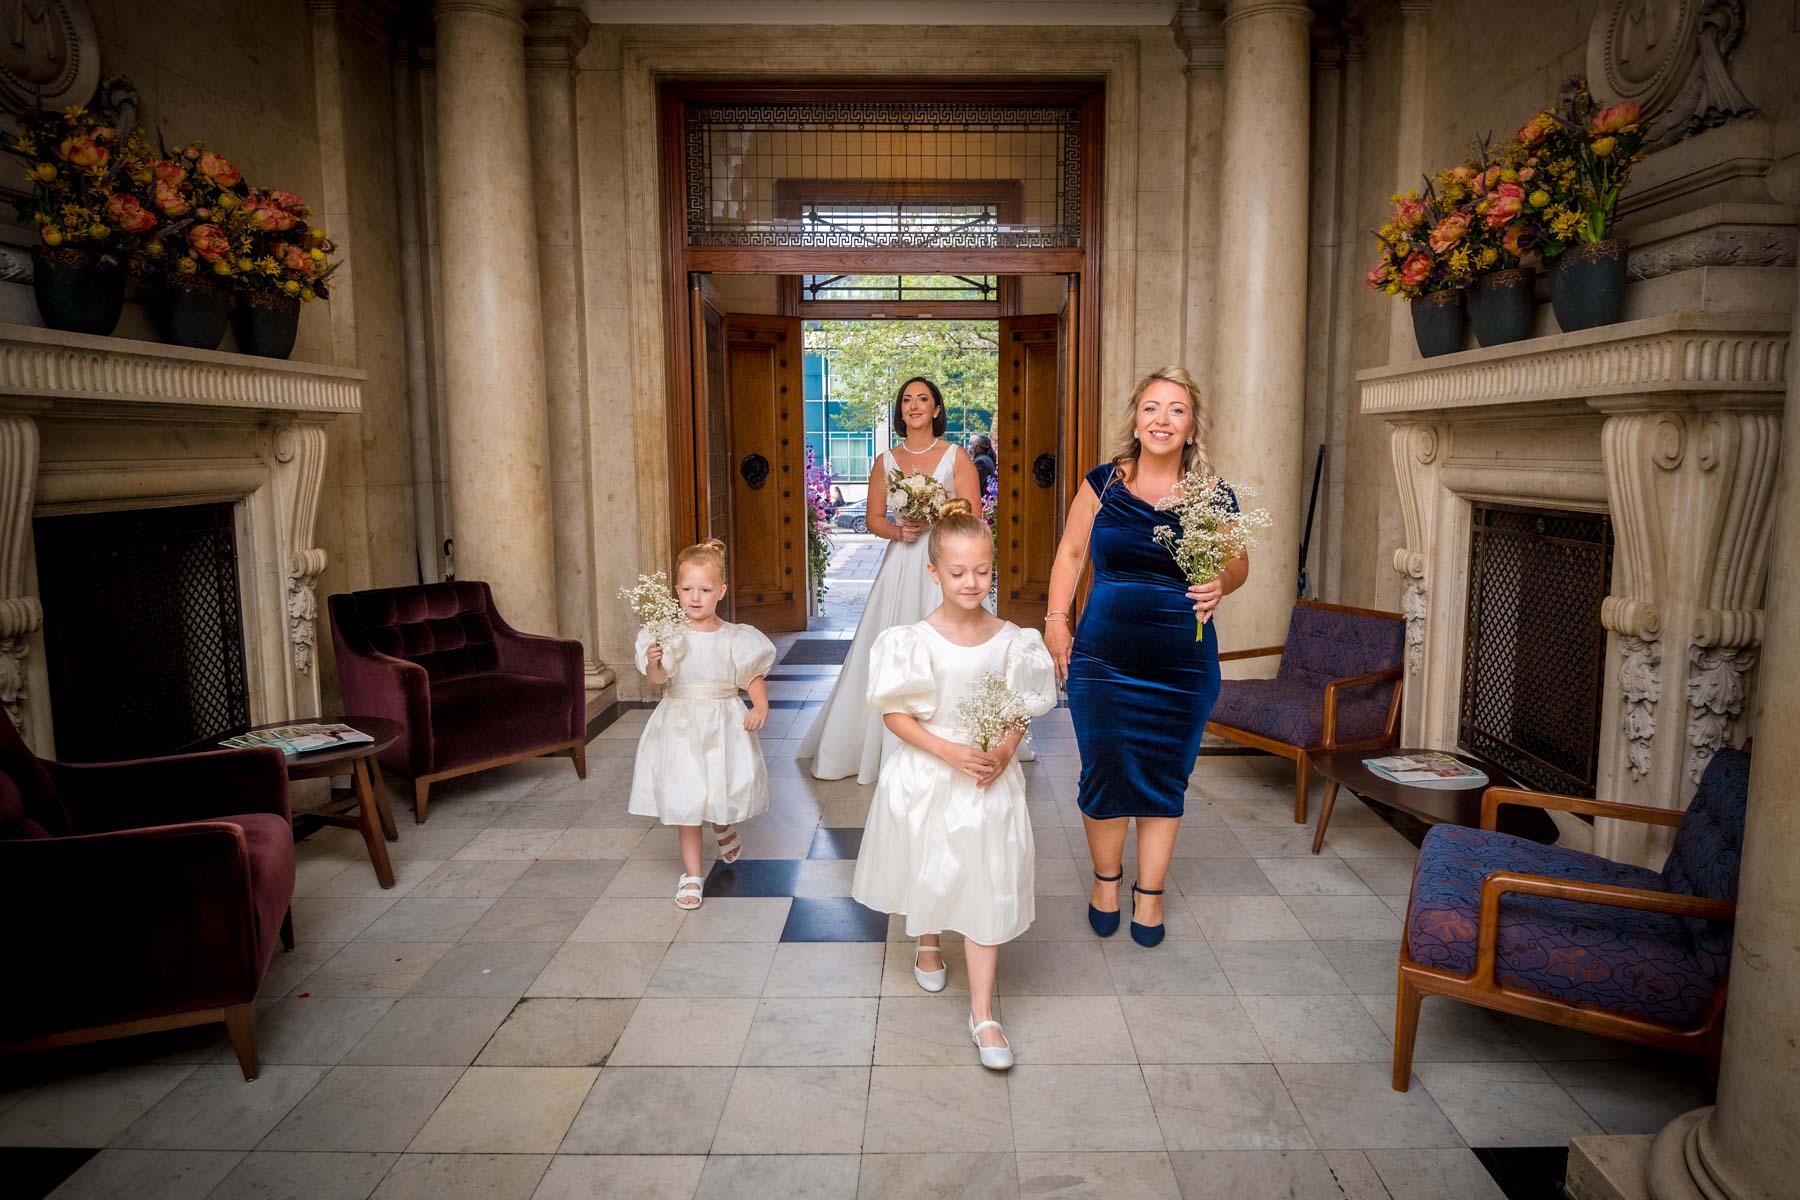 The bride arrives for her wedding with her duaghters and friend through the entrance of the Old Marylebone Town Hall